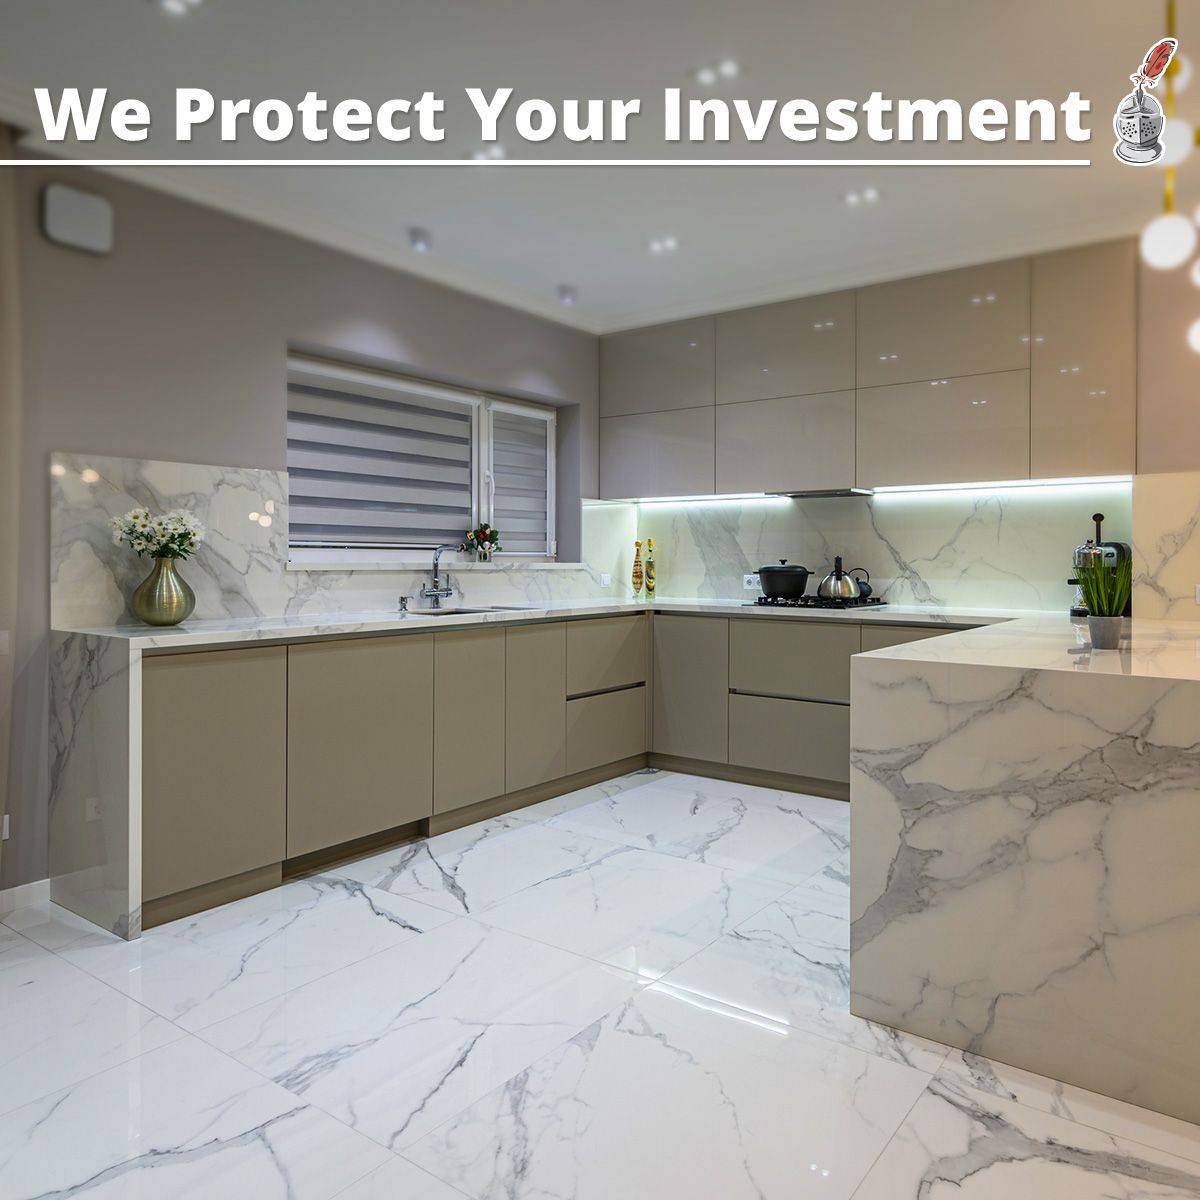 We Protect Your Investment